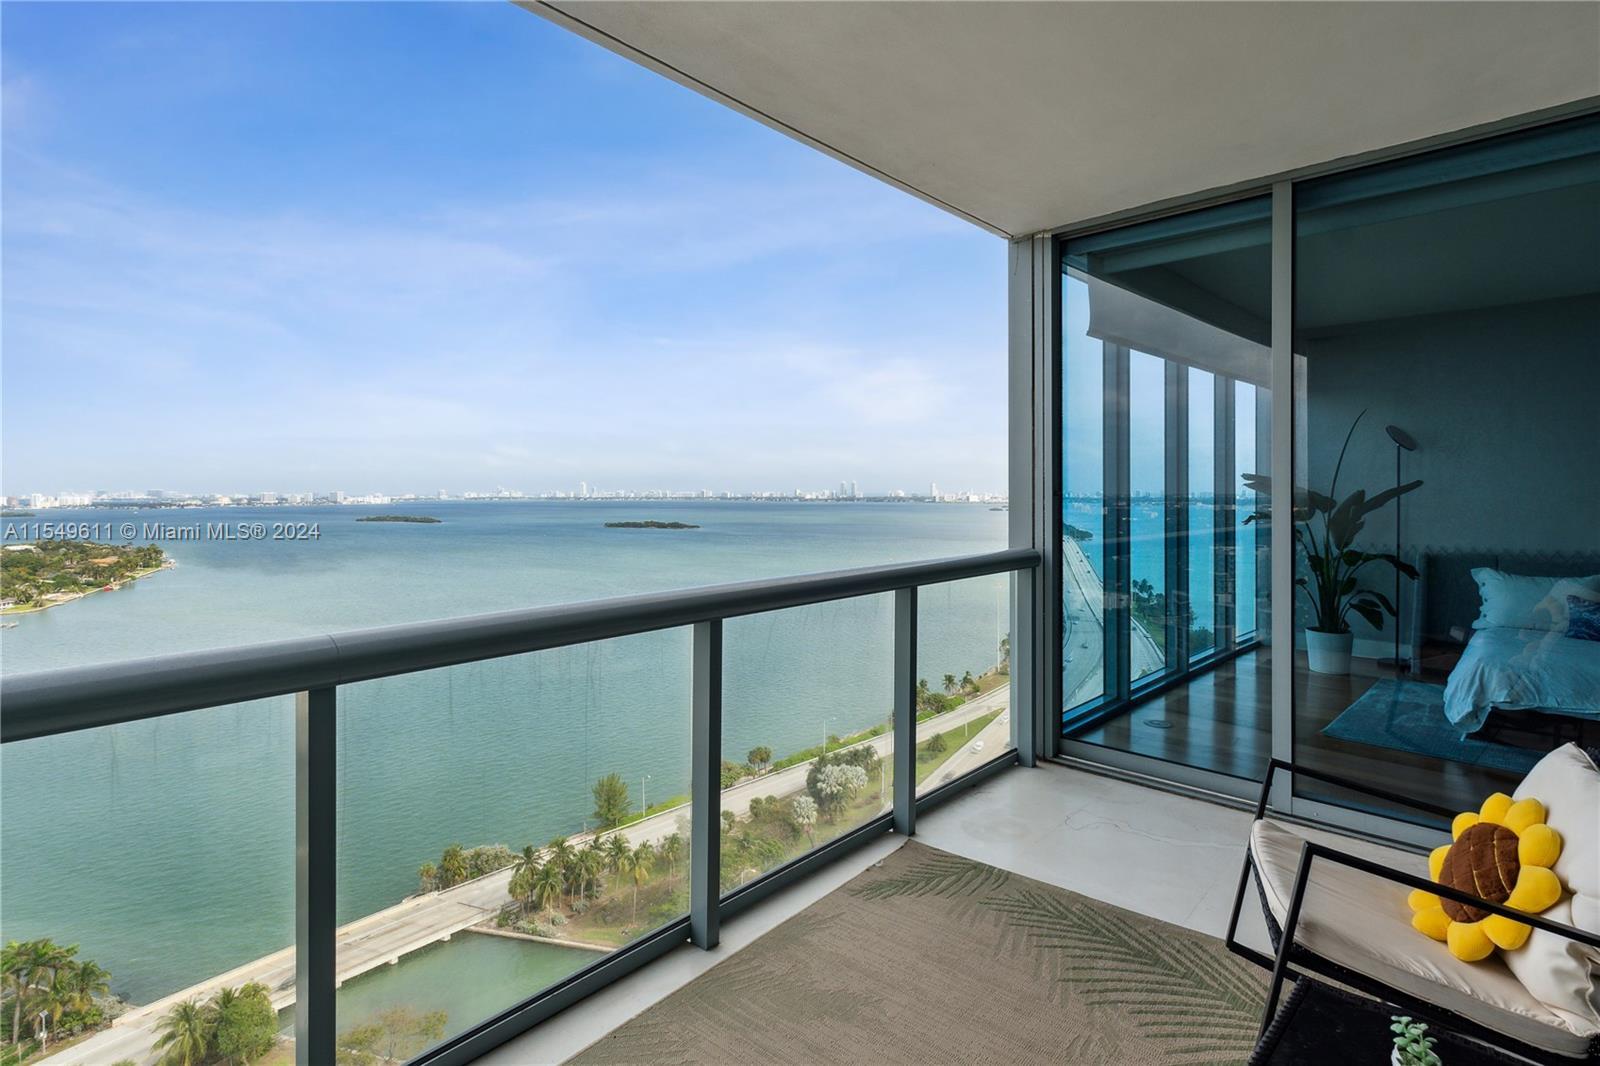 Discover luxury living in this stunning 2-bedroom, 2.5-bathroom condo boasting unrivaled views of th